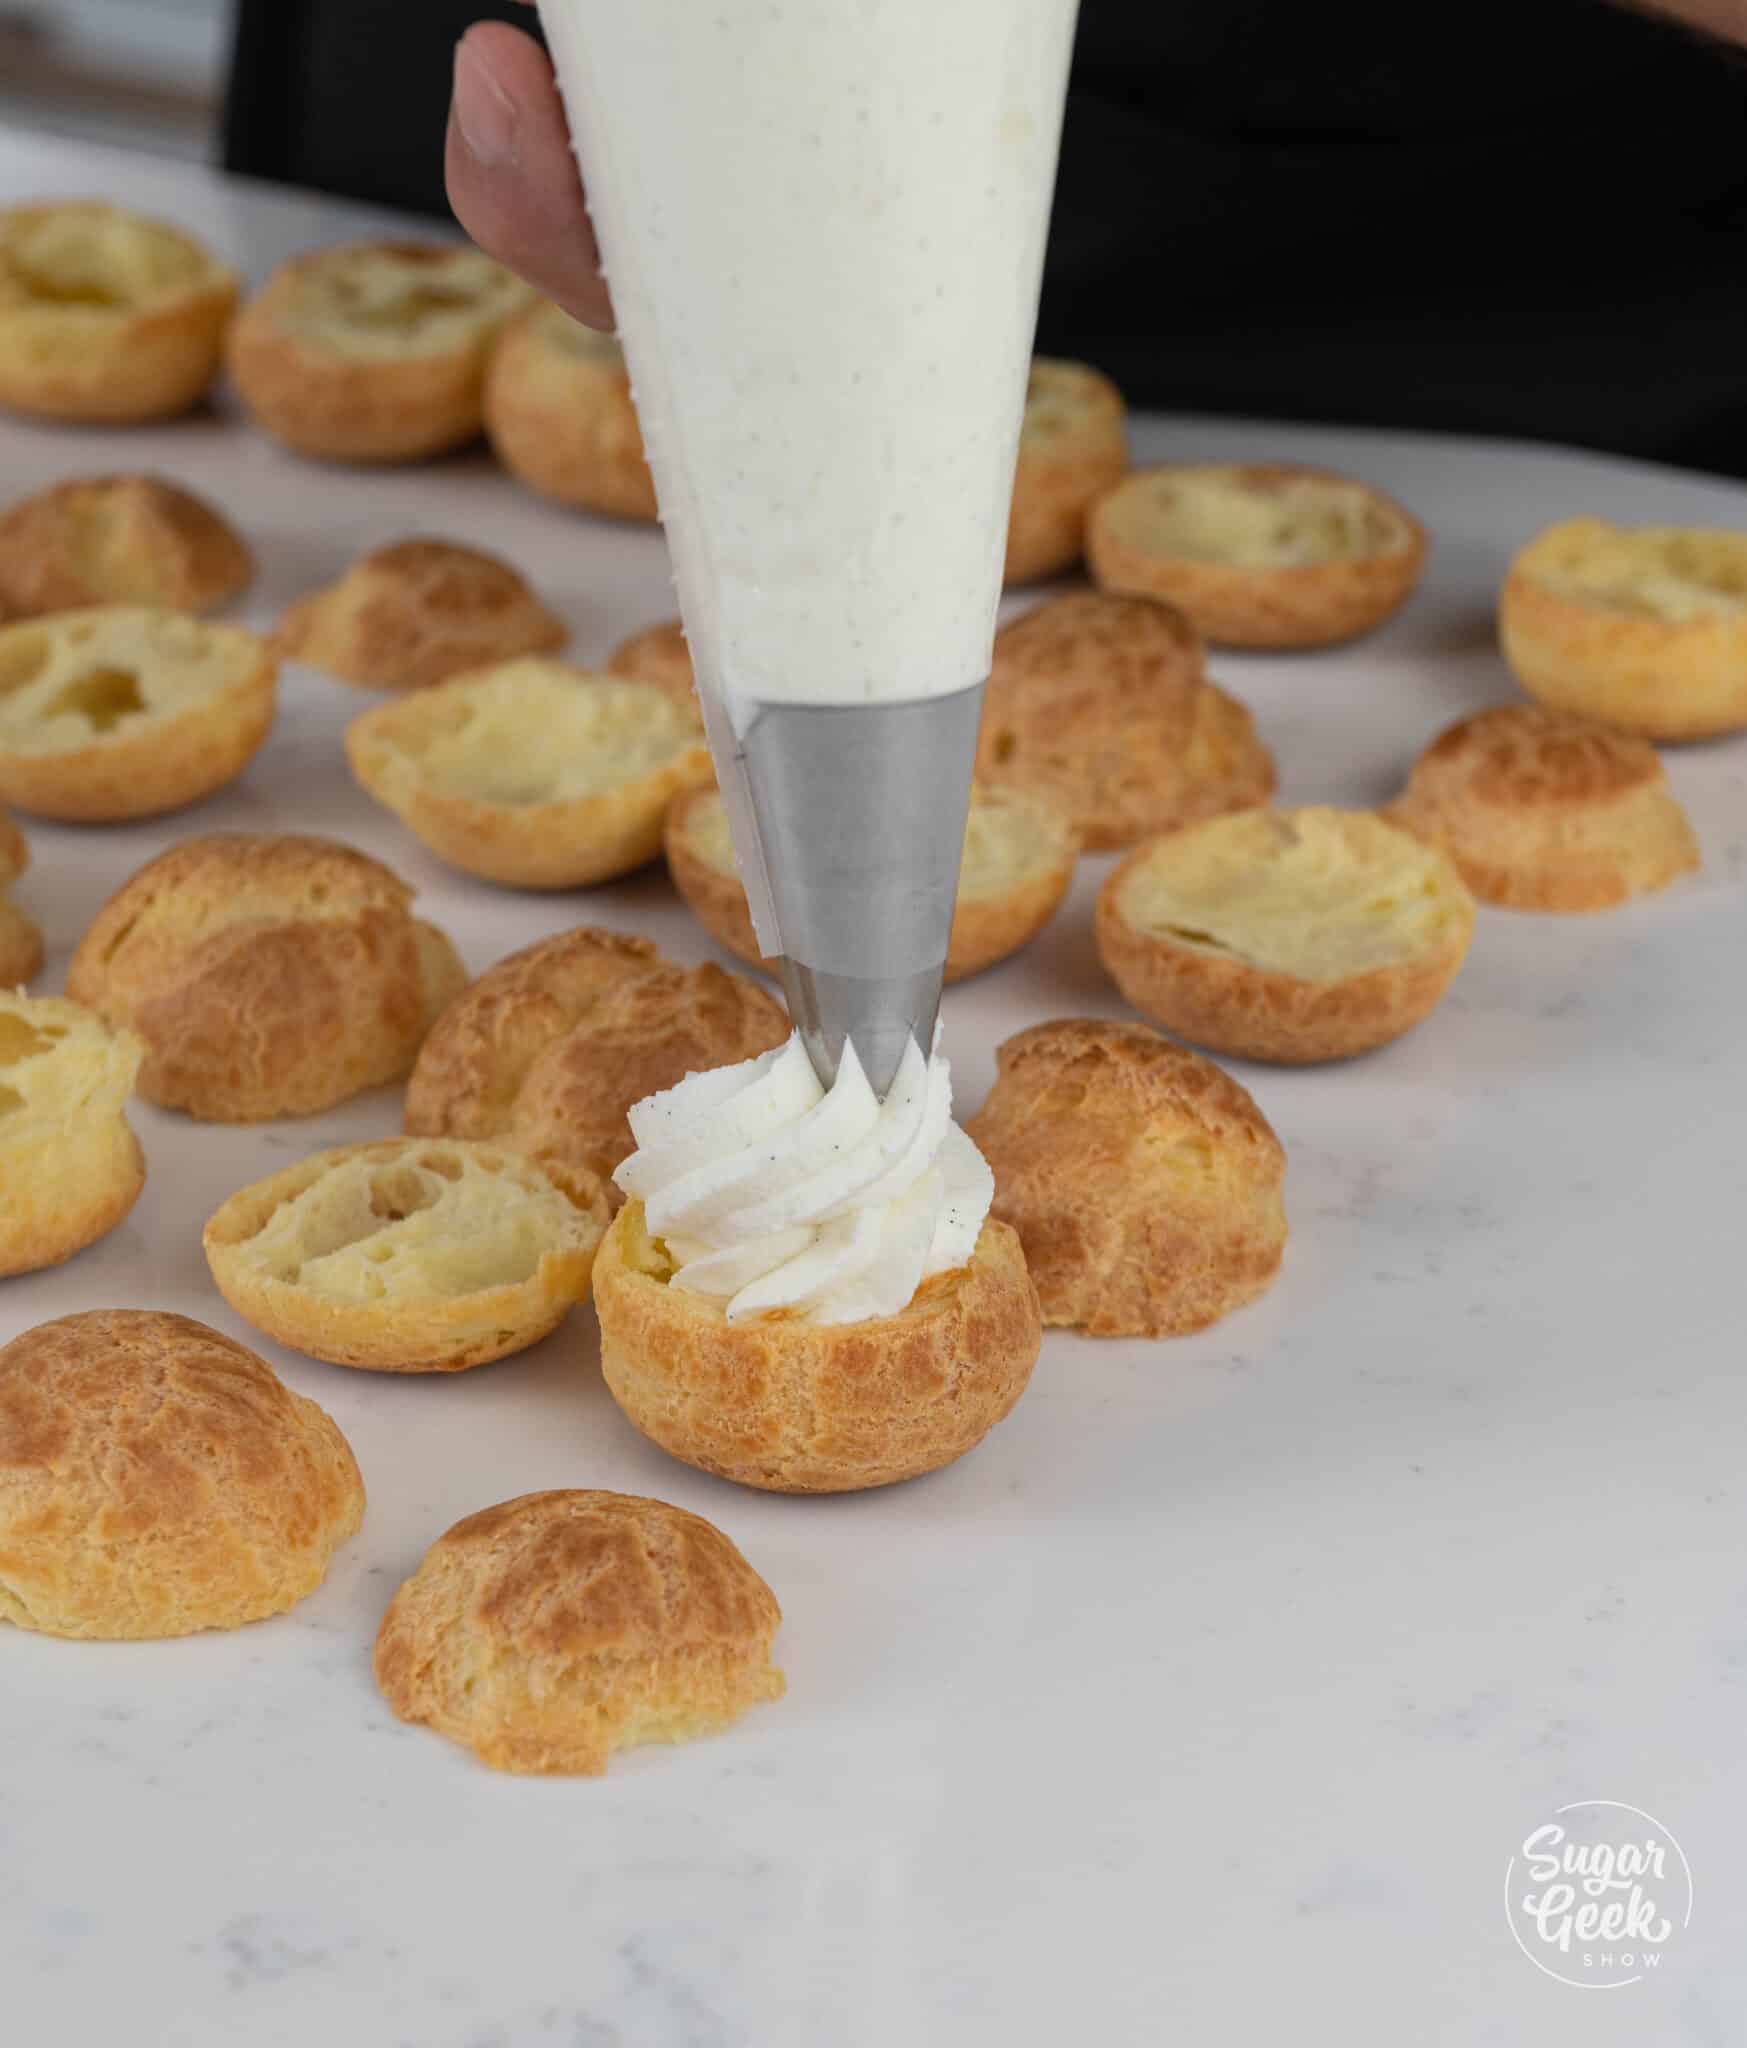 piping bag piping whipped cream onto a cream puff